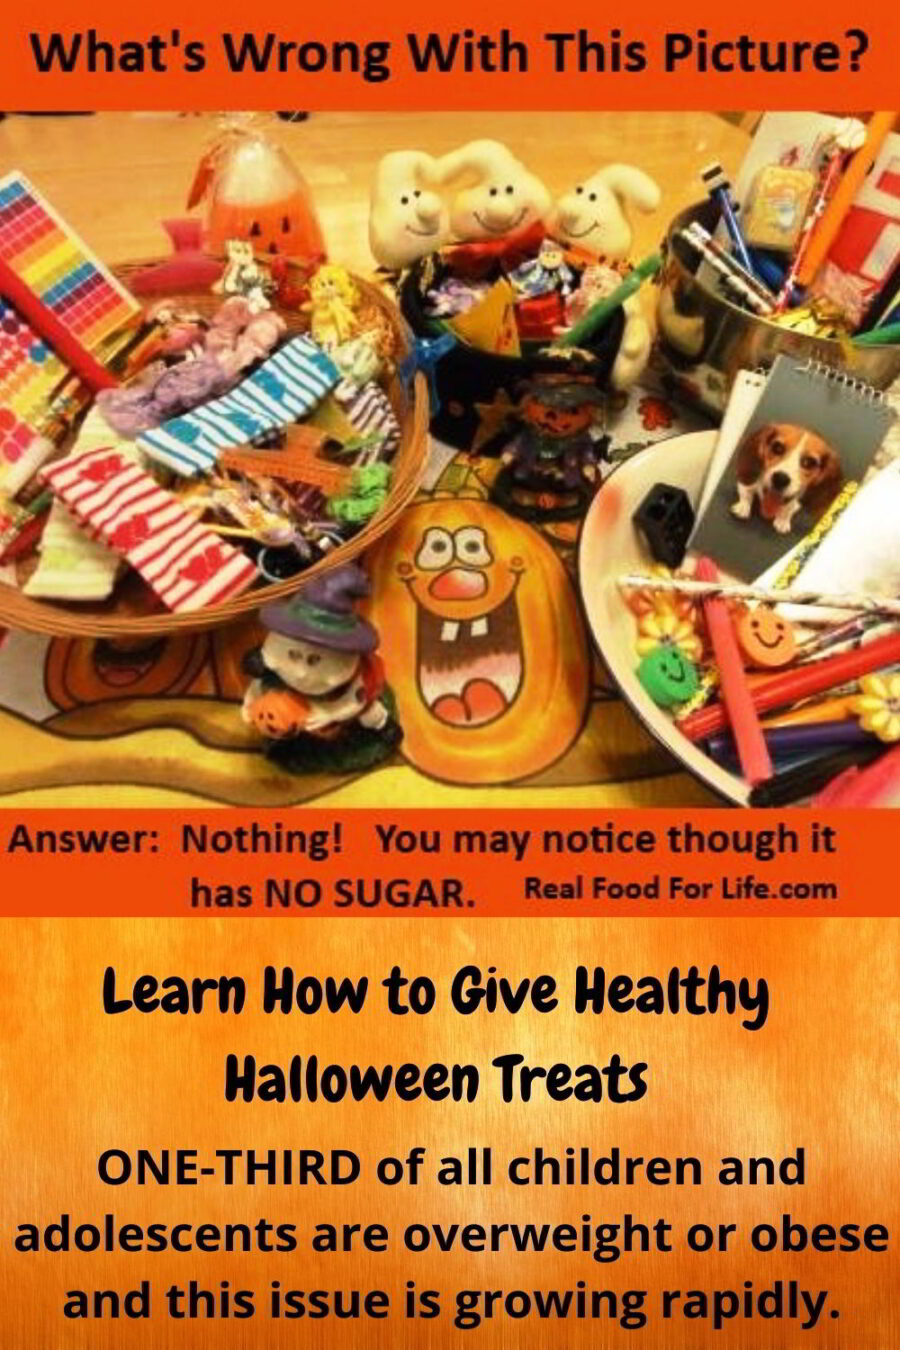 How to Give Healthy Halloween Treats